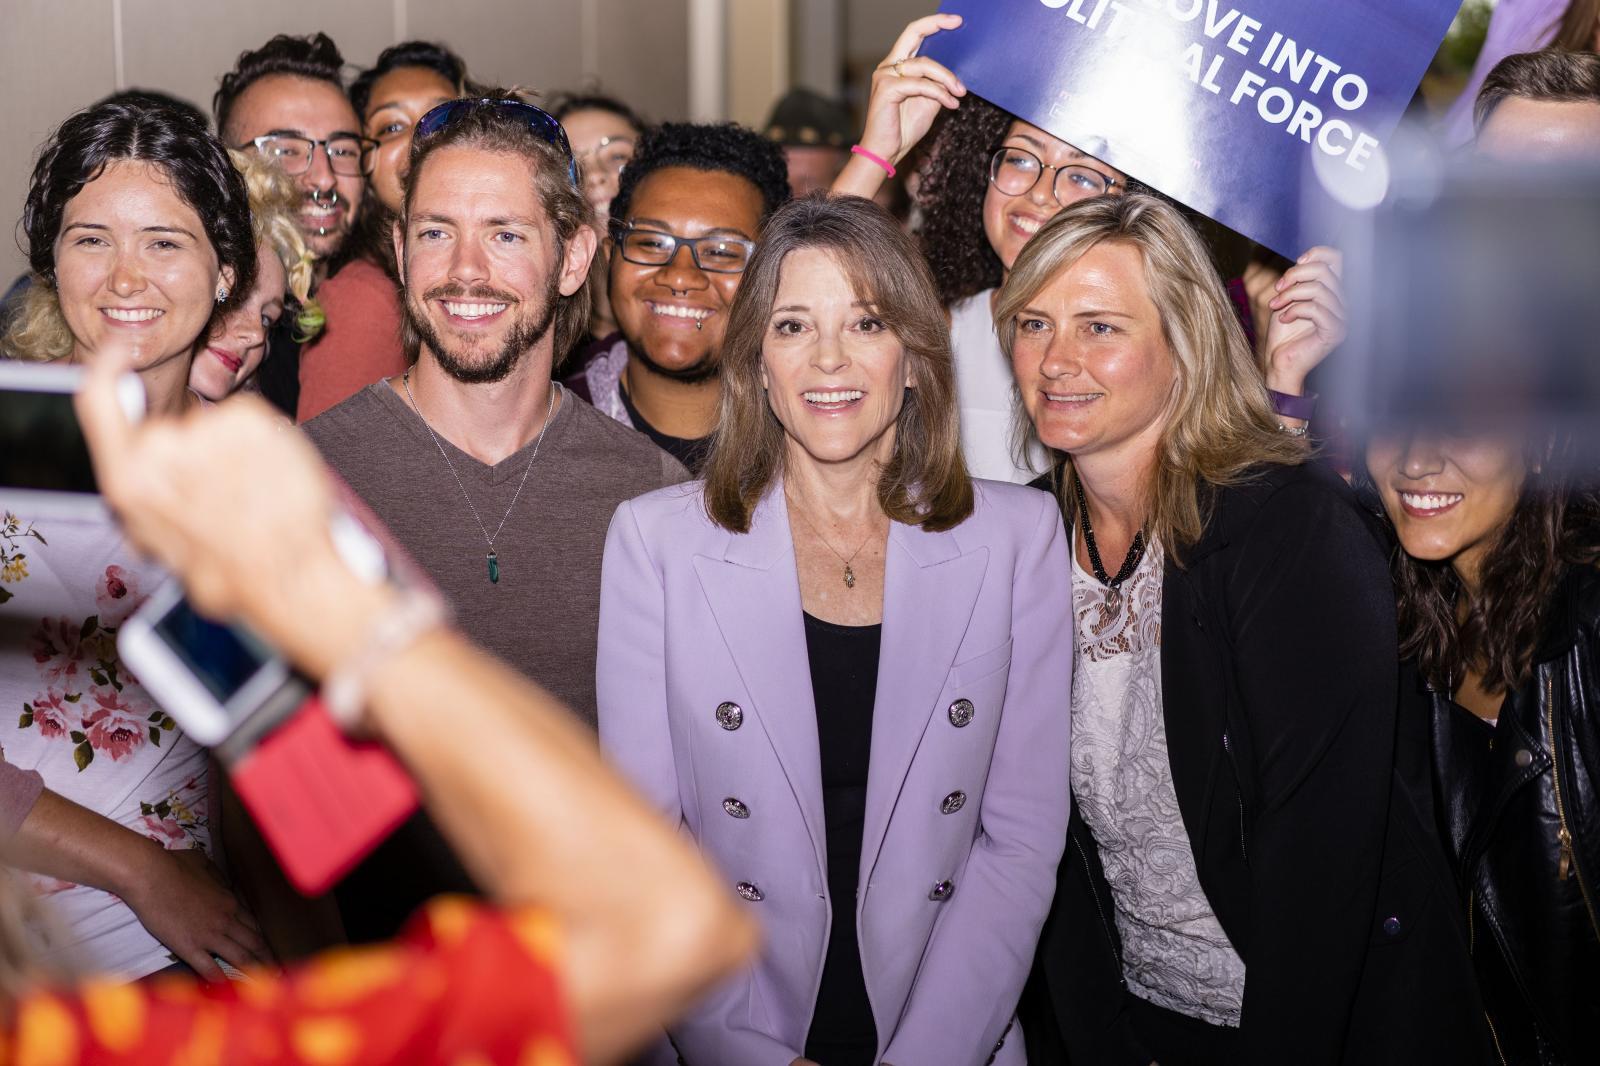 Fairfield - 2020 presidential candidate Marianne Williamson takes a...